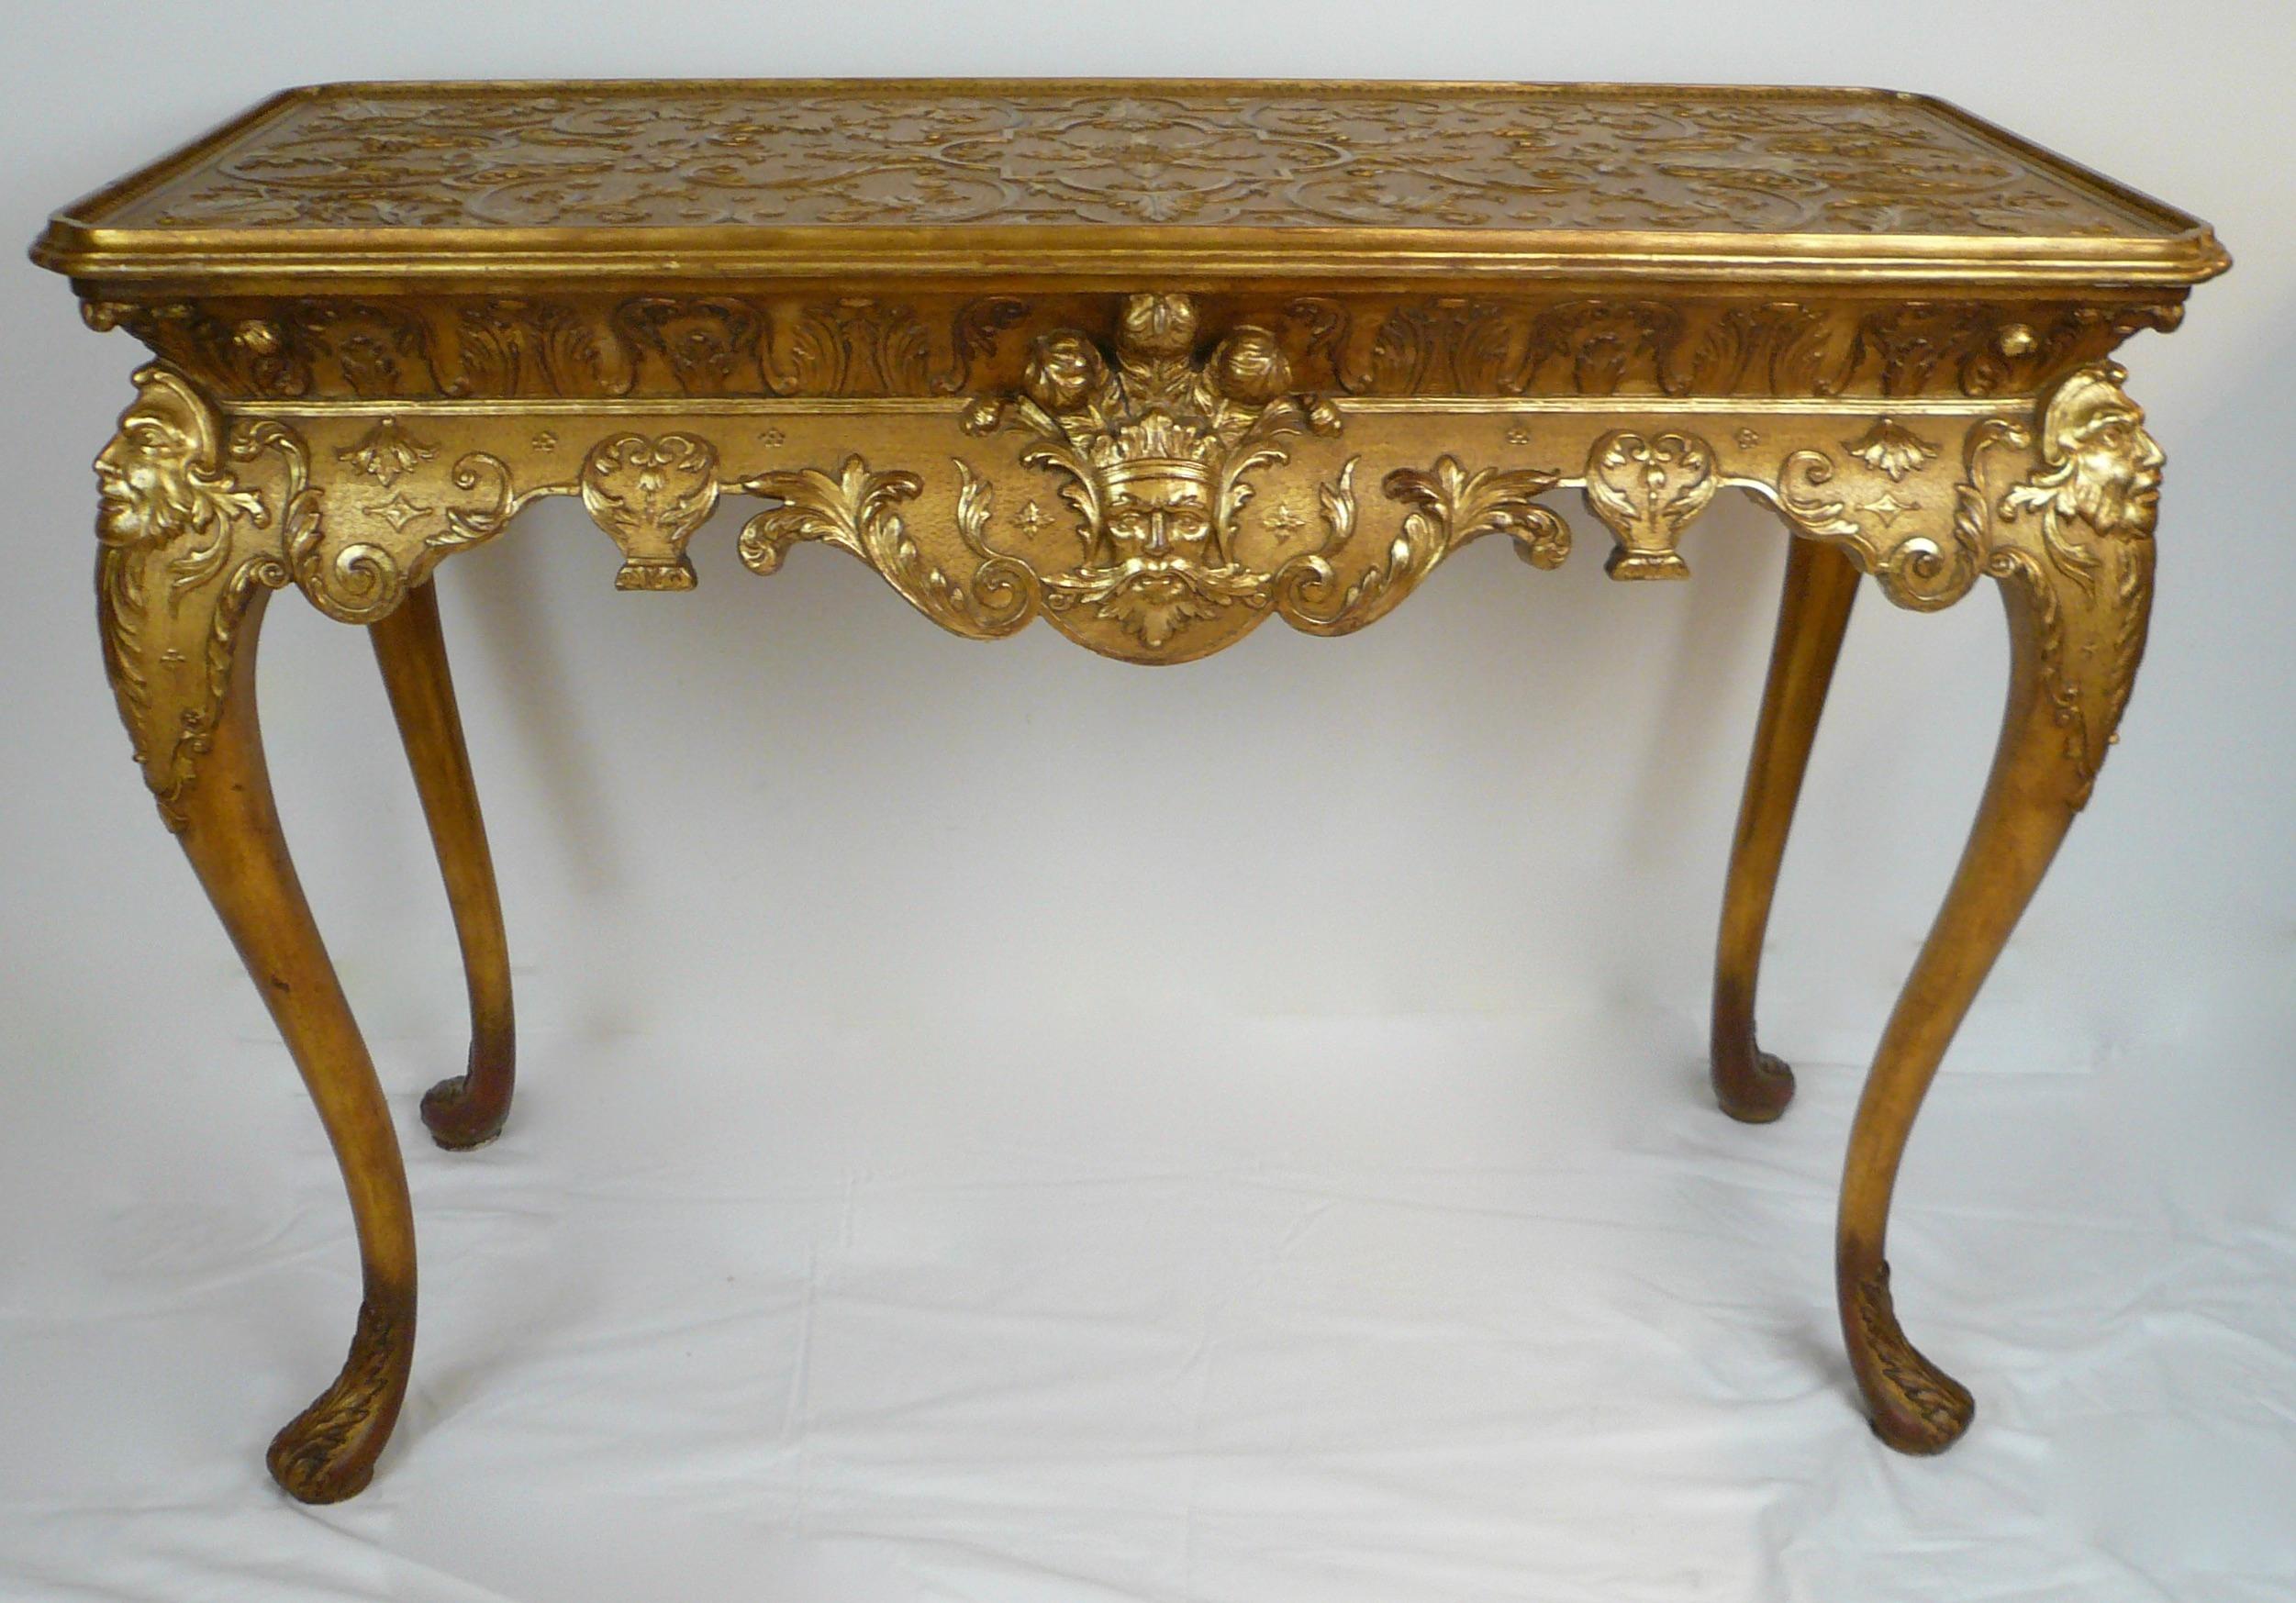 This impressive pair of gilt wood tables feature a carved frieze incorporating Prince of Wales plumes, leopard heads, and mask motifs. The cabriole legs with acanthus leaf carving terminate on pad feet.